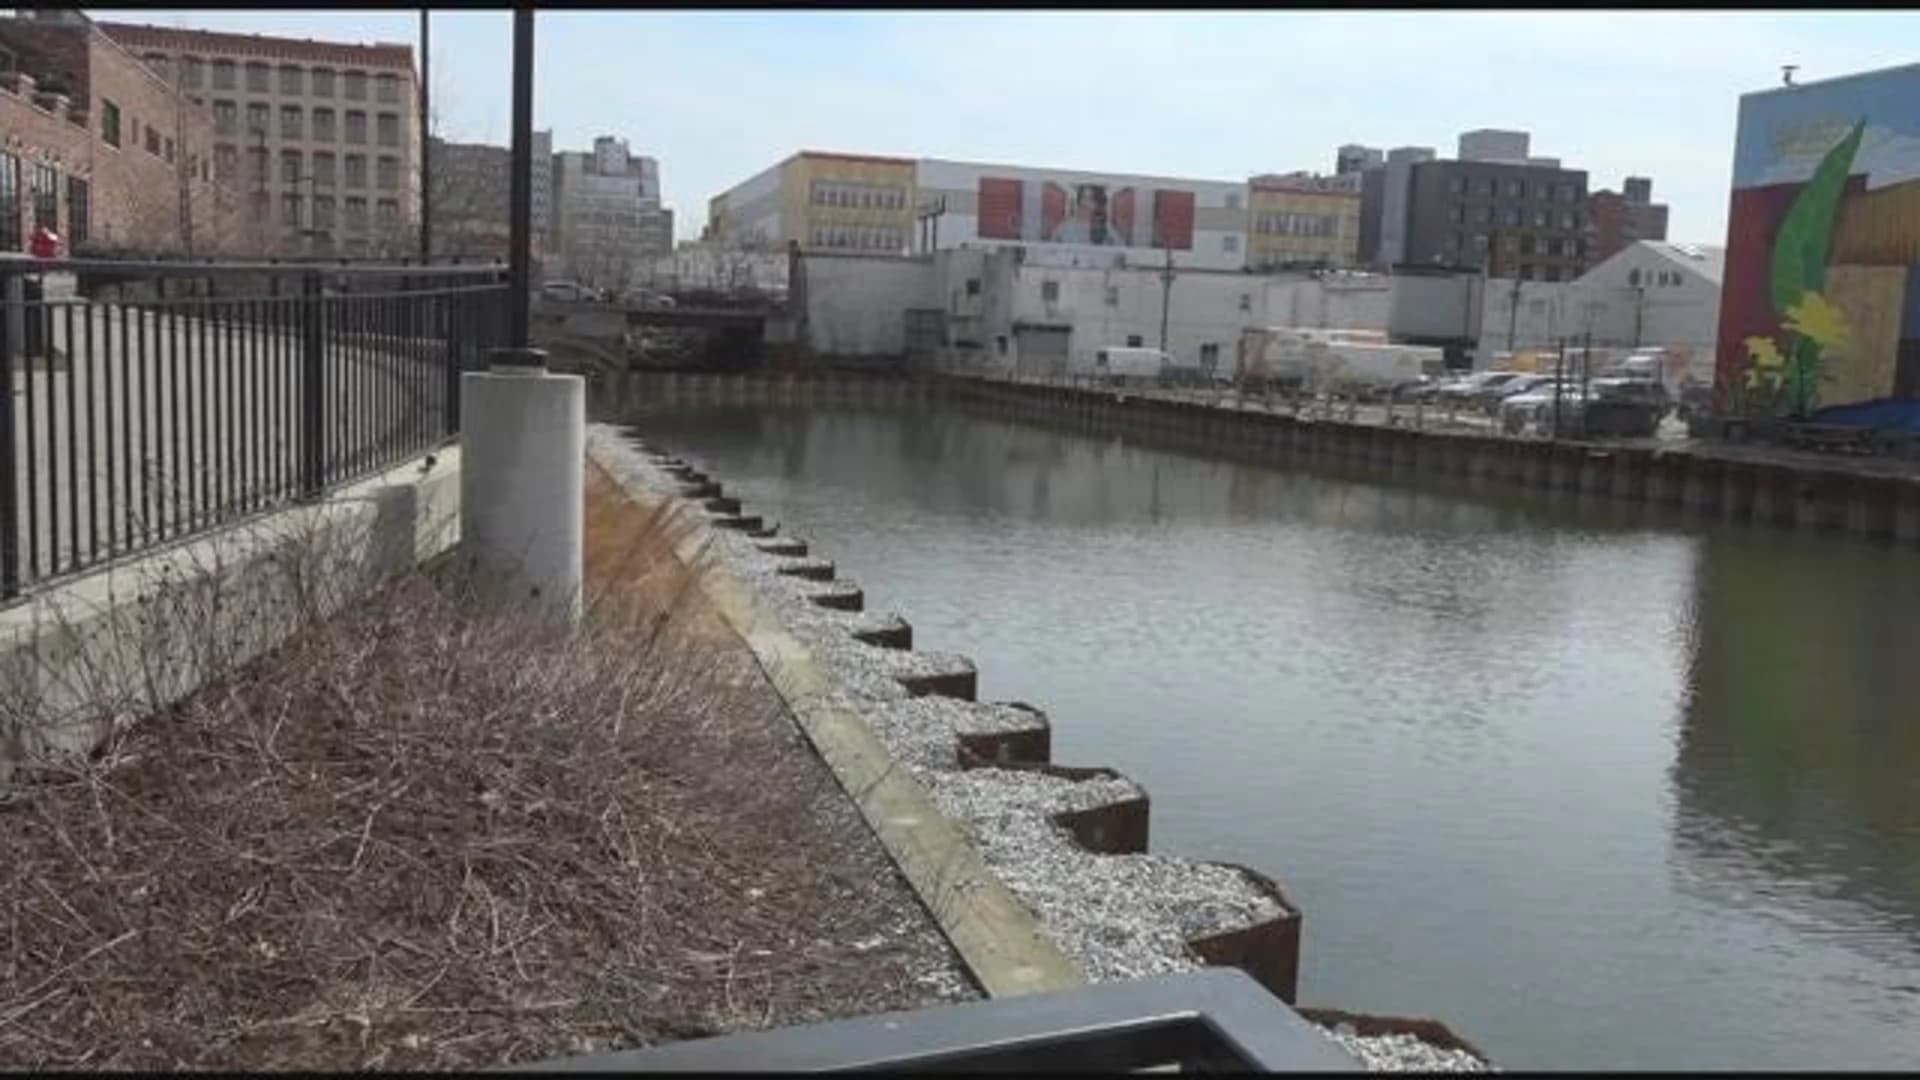 EPA goes to work cleaning up Gowanus Canal